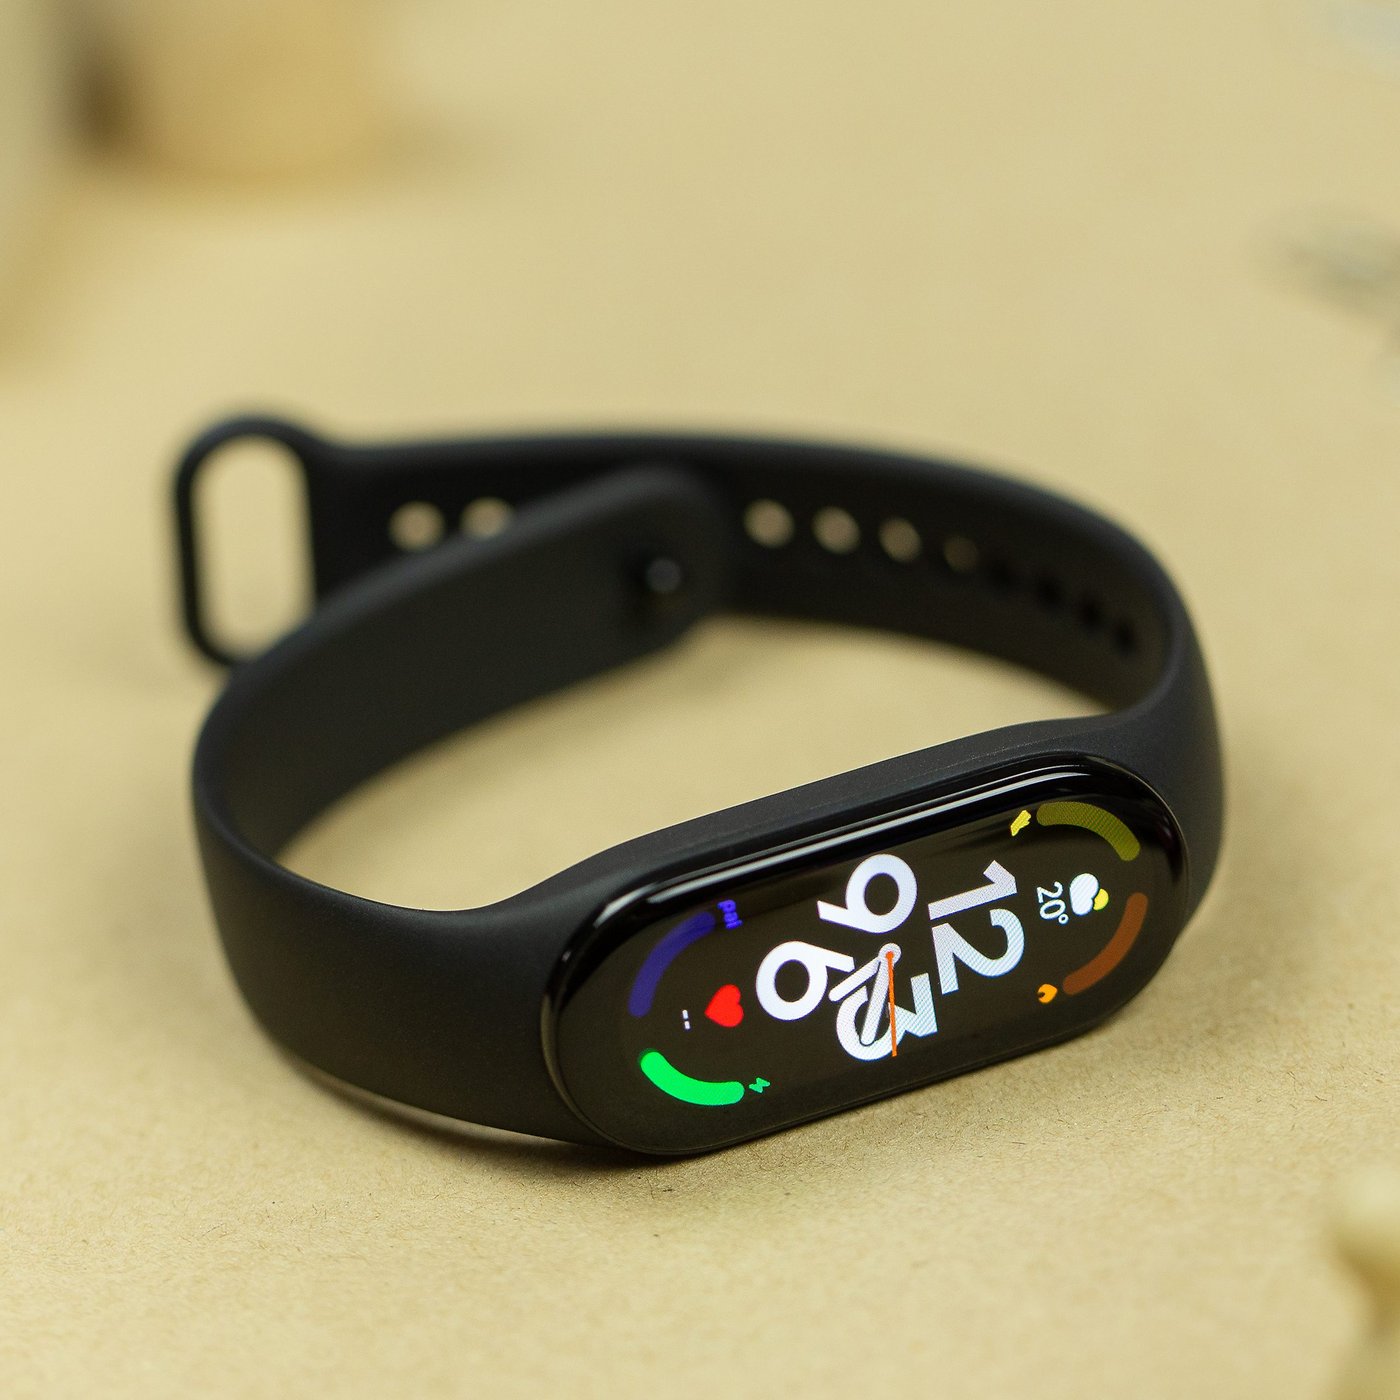 Xiaomi Smart Band 7 Review: A Competent, Well-Featured Tracker At